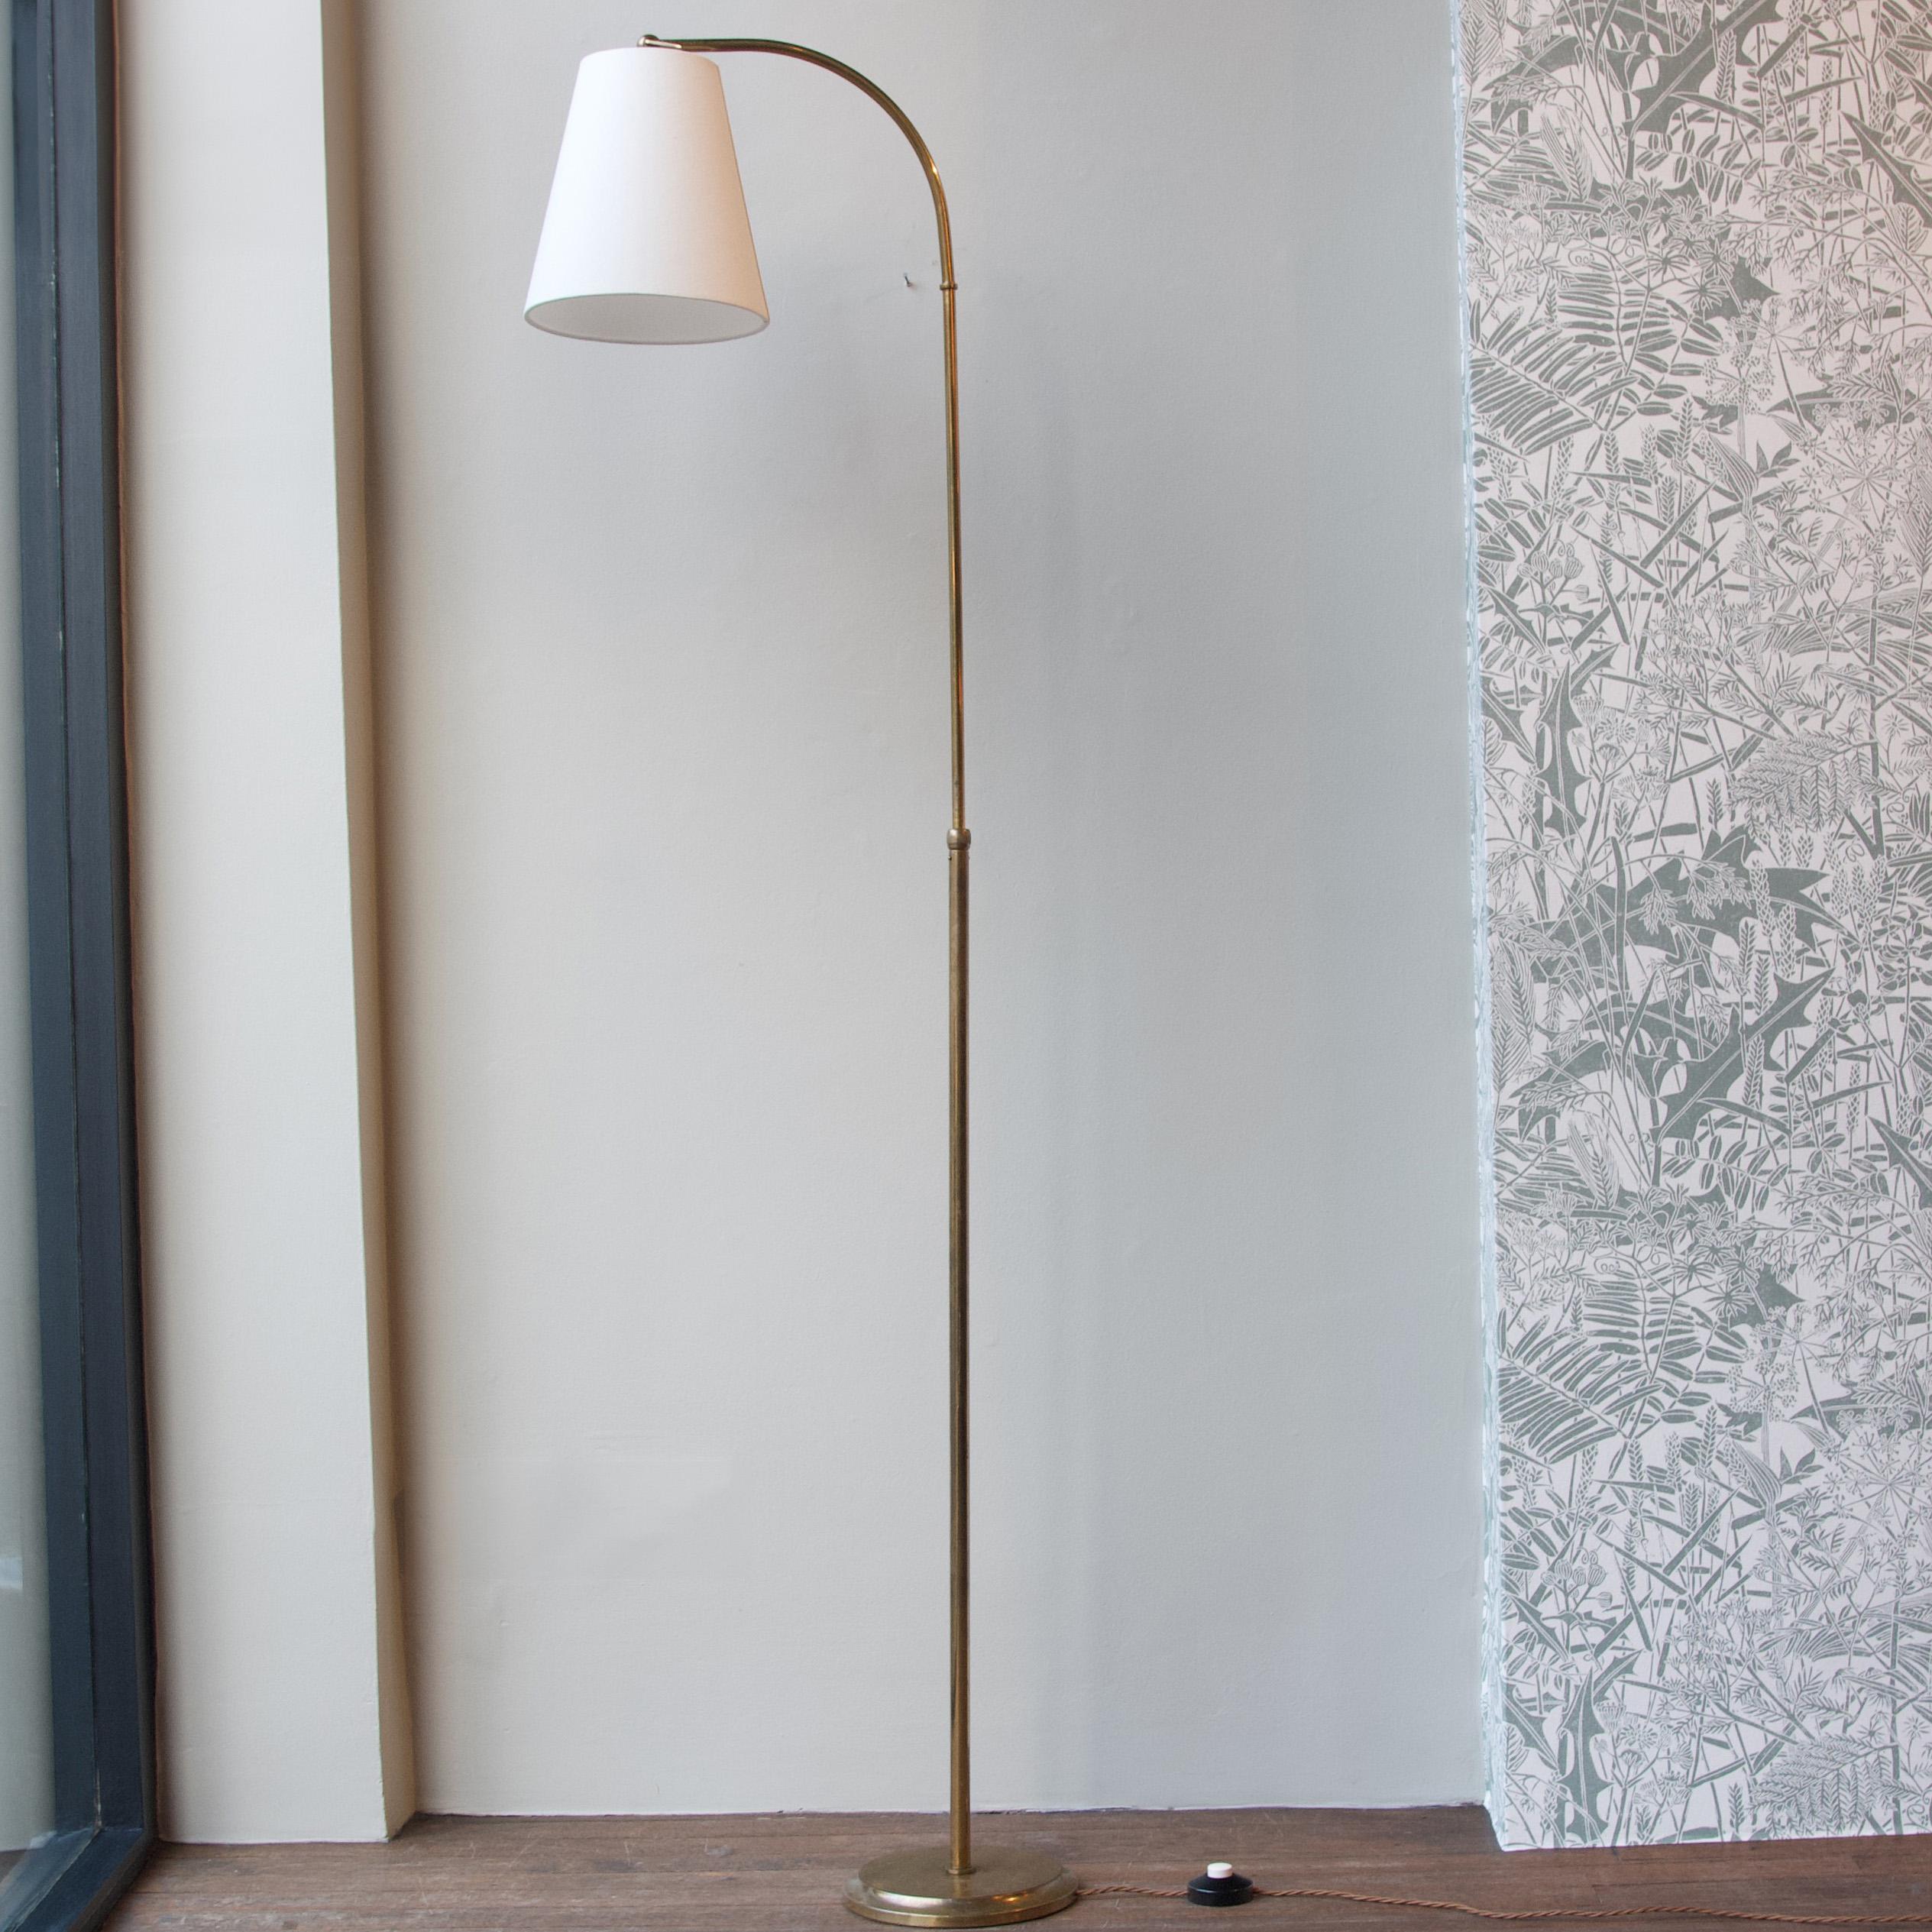 A telescopic brass floor light made in Italy around the 1960s.

The telescopic extension of this light allows it to be perfectly poised in any location. At its lowest height, its arched stem and angle poised head would be perfectly suited as a